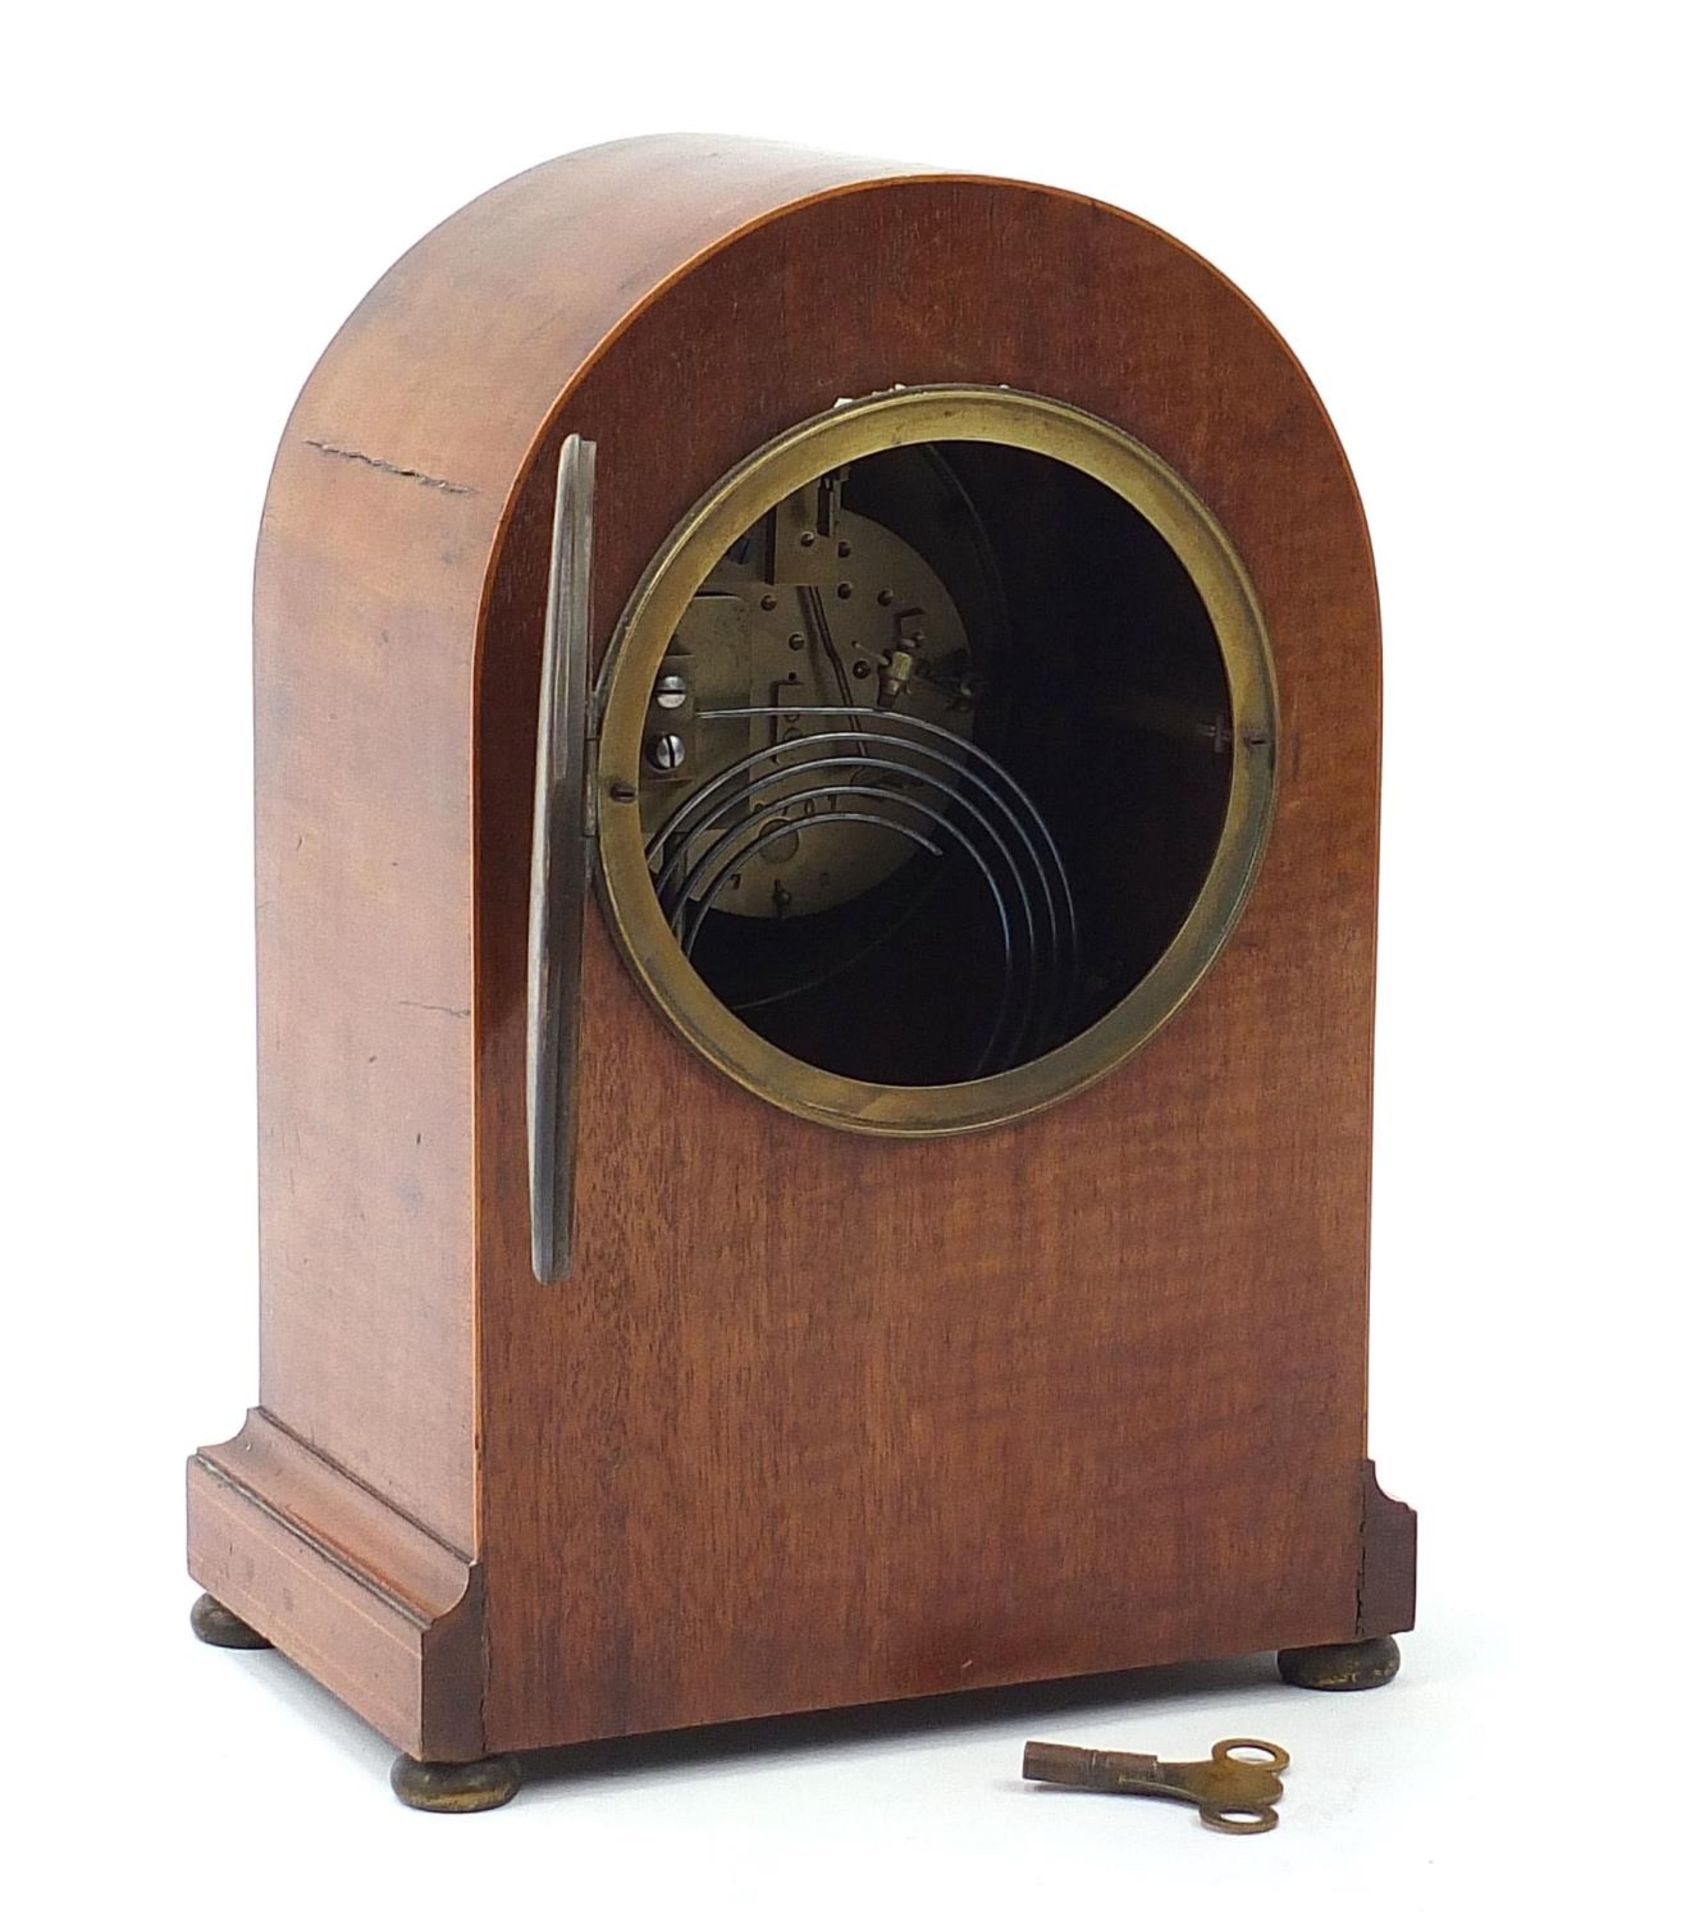 Elkington & Co, Edwardian inlaid mahogany dome top mantle clock striking on a gong with enamel - Image 9 of 10